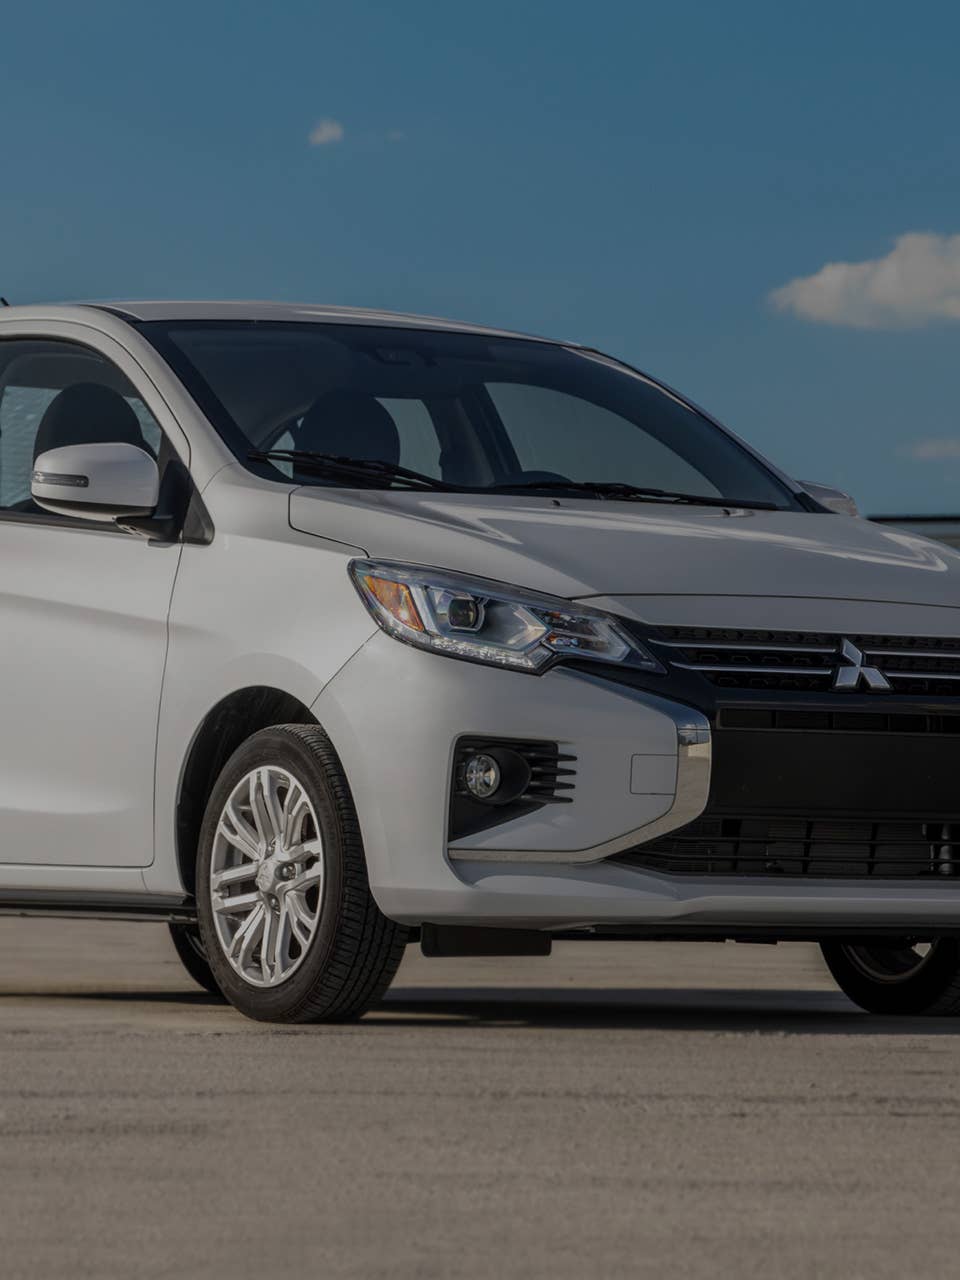 Changes to the 2023 Mitsubishi Models